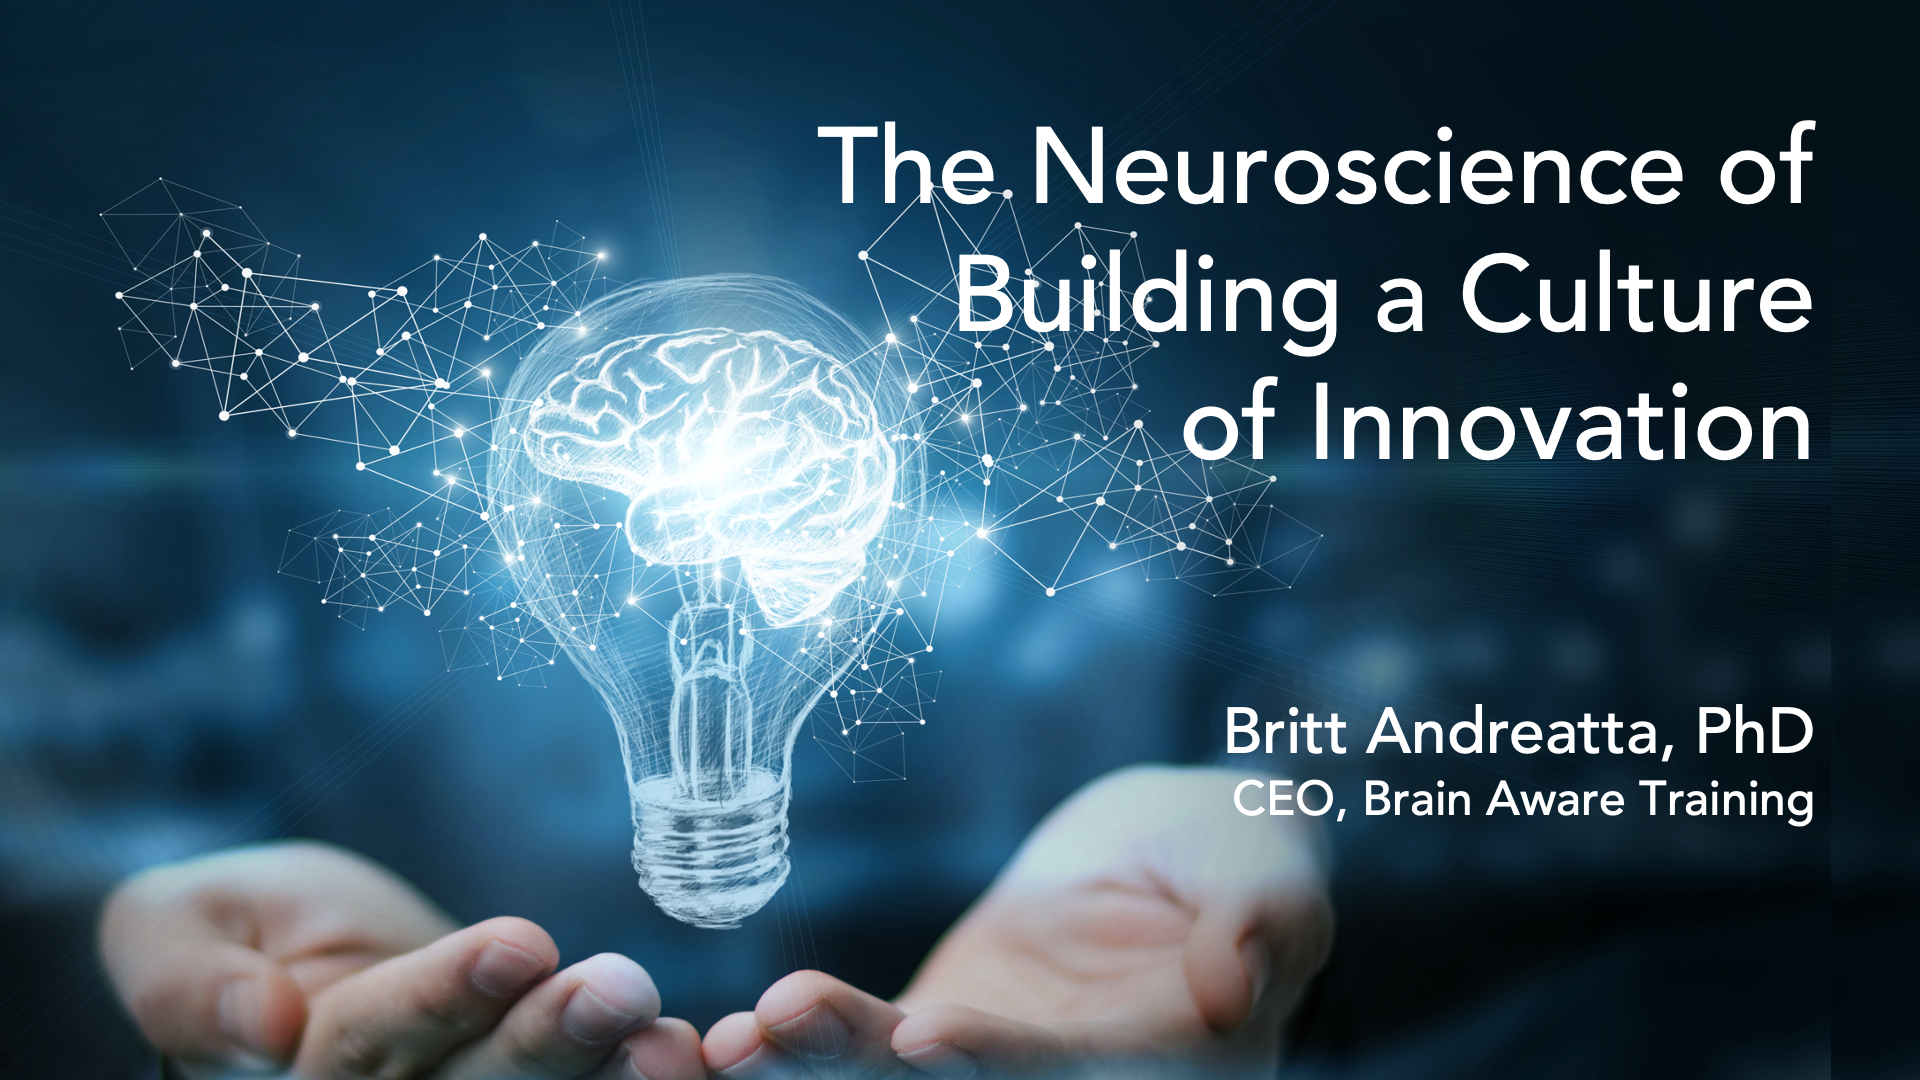 The Neuroscience of Innovation: Empowering New Ways of Thinking and Doing